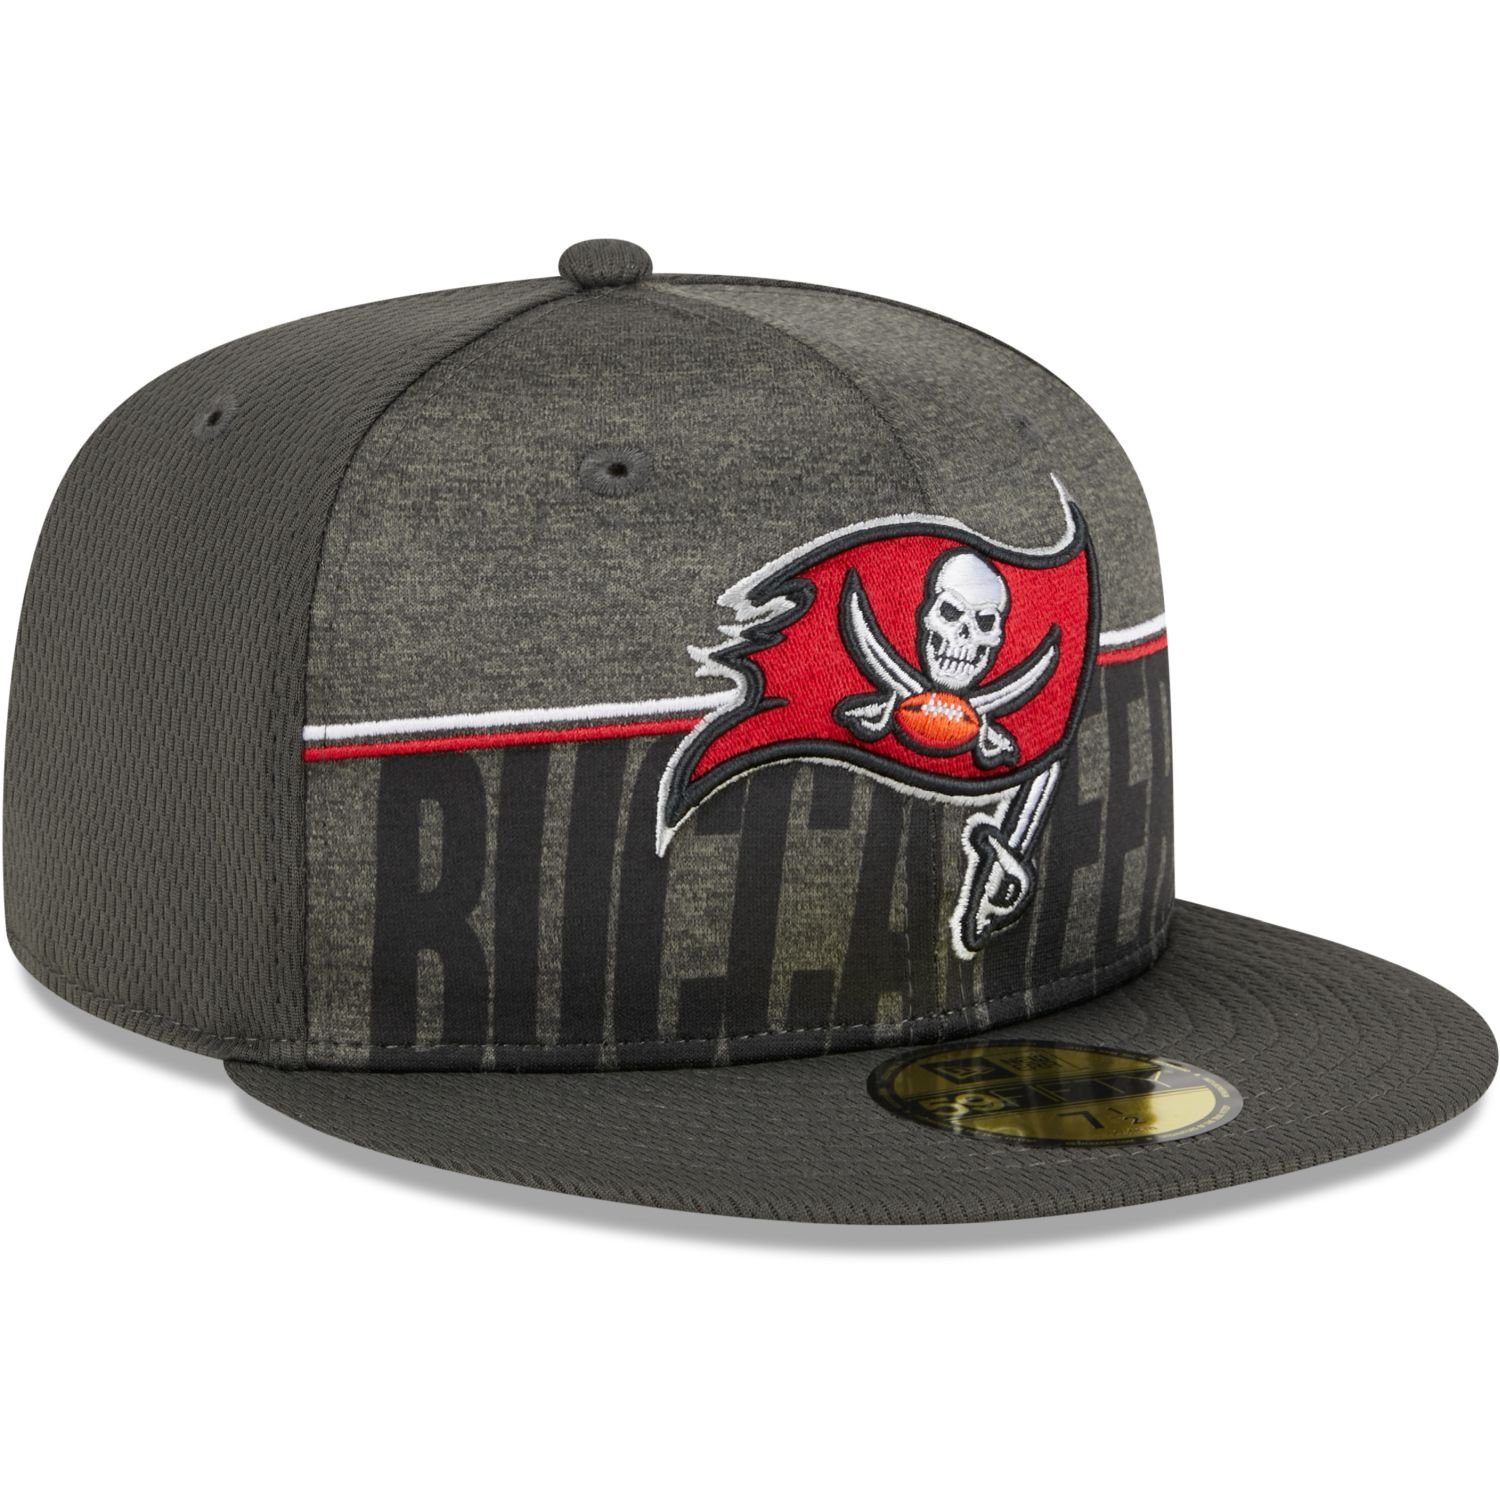 Era Bay Cap Tampa Buccaneers New 59Fifty NFL Fitted TRAINING